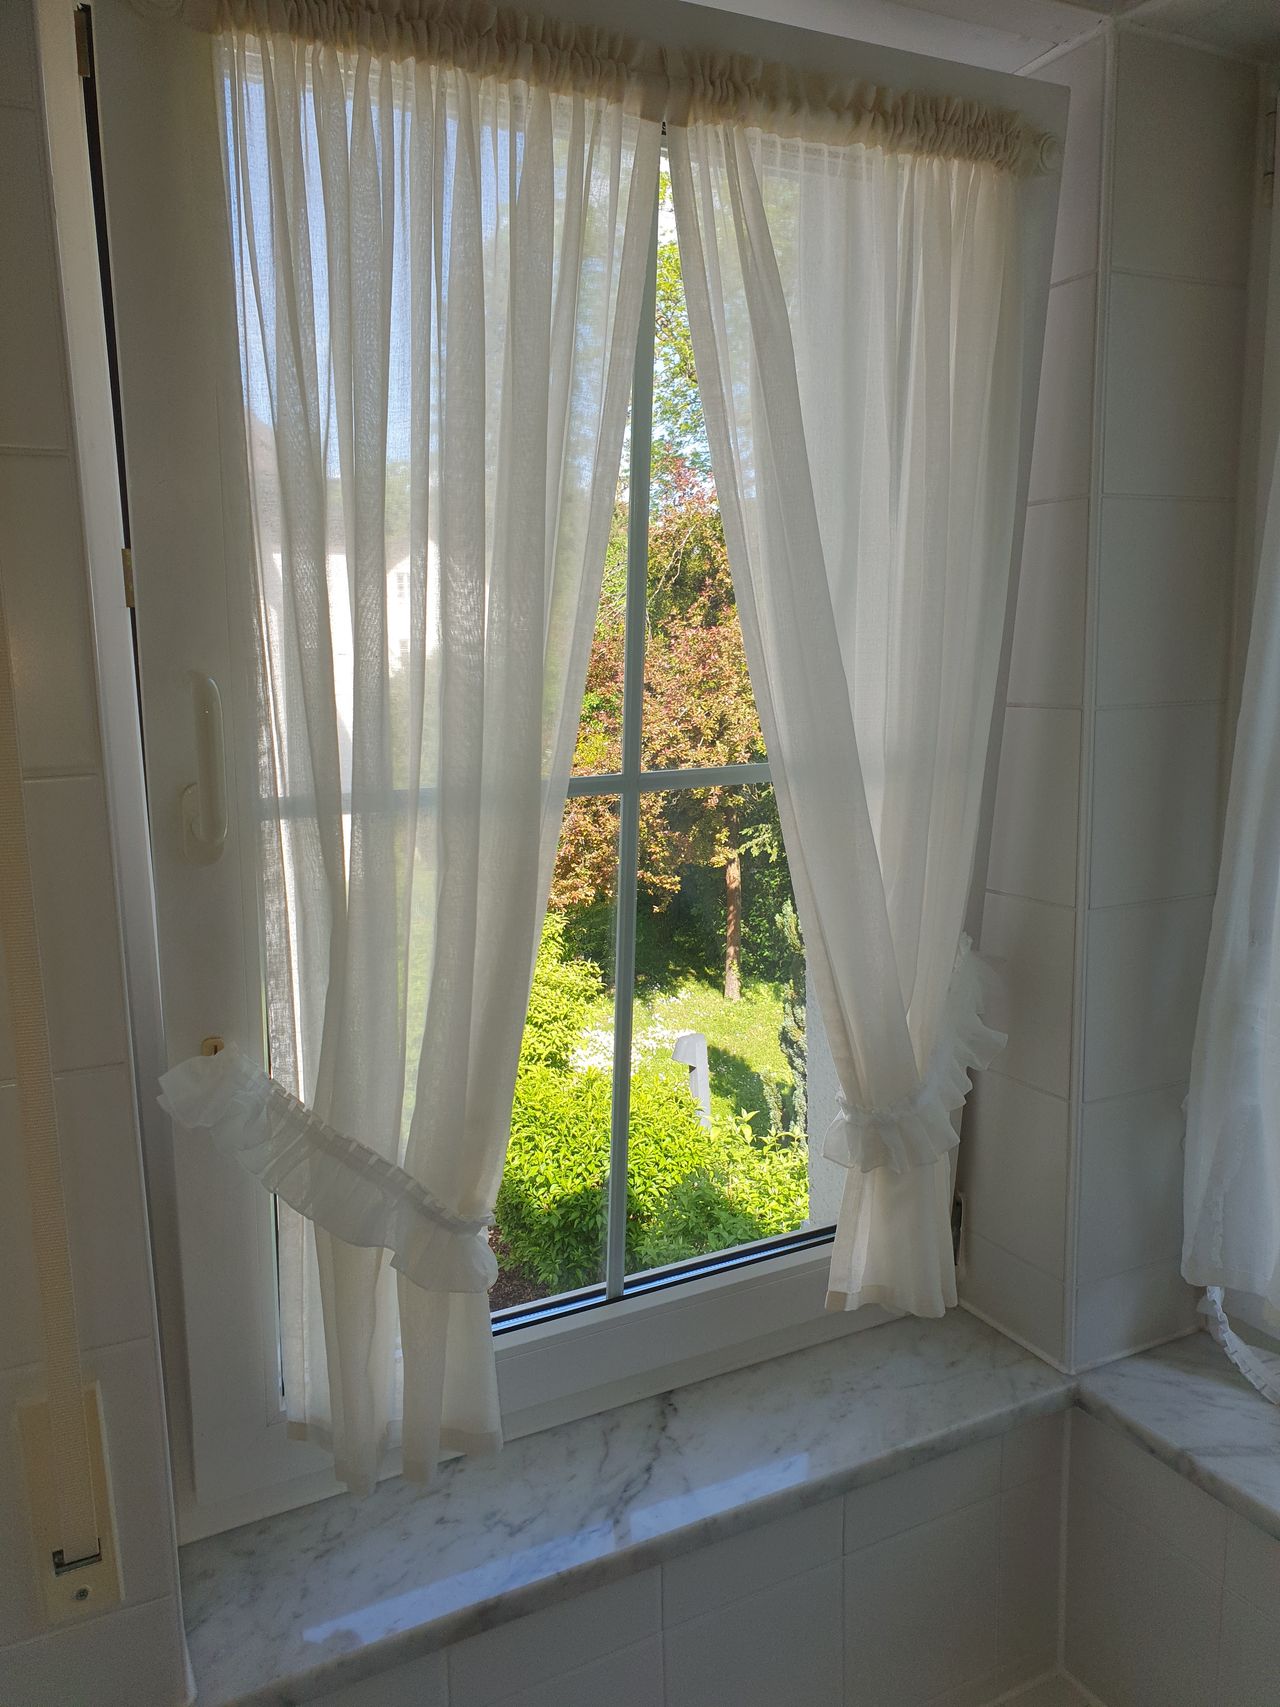 2 bedrooms  designer flat with balcony close to the city center of Munich and  Nymphenburg and Blutenburg castle